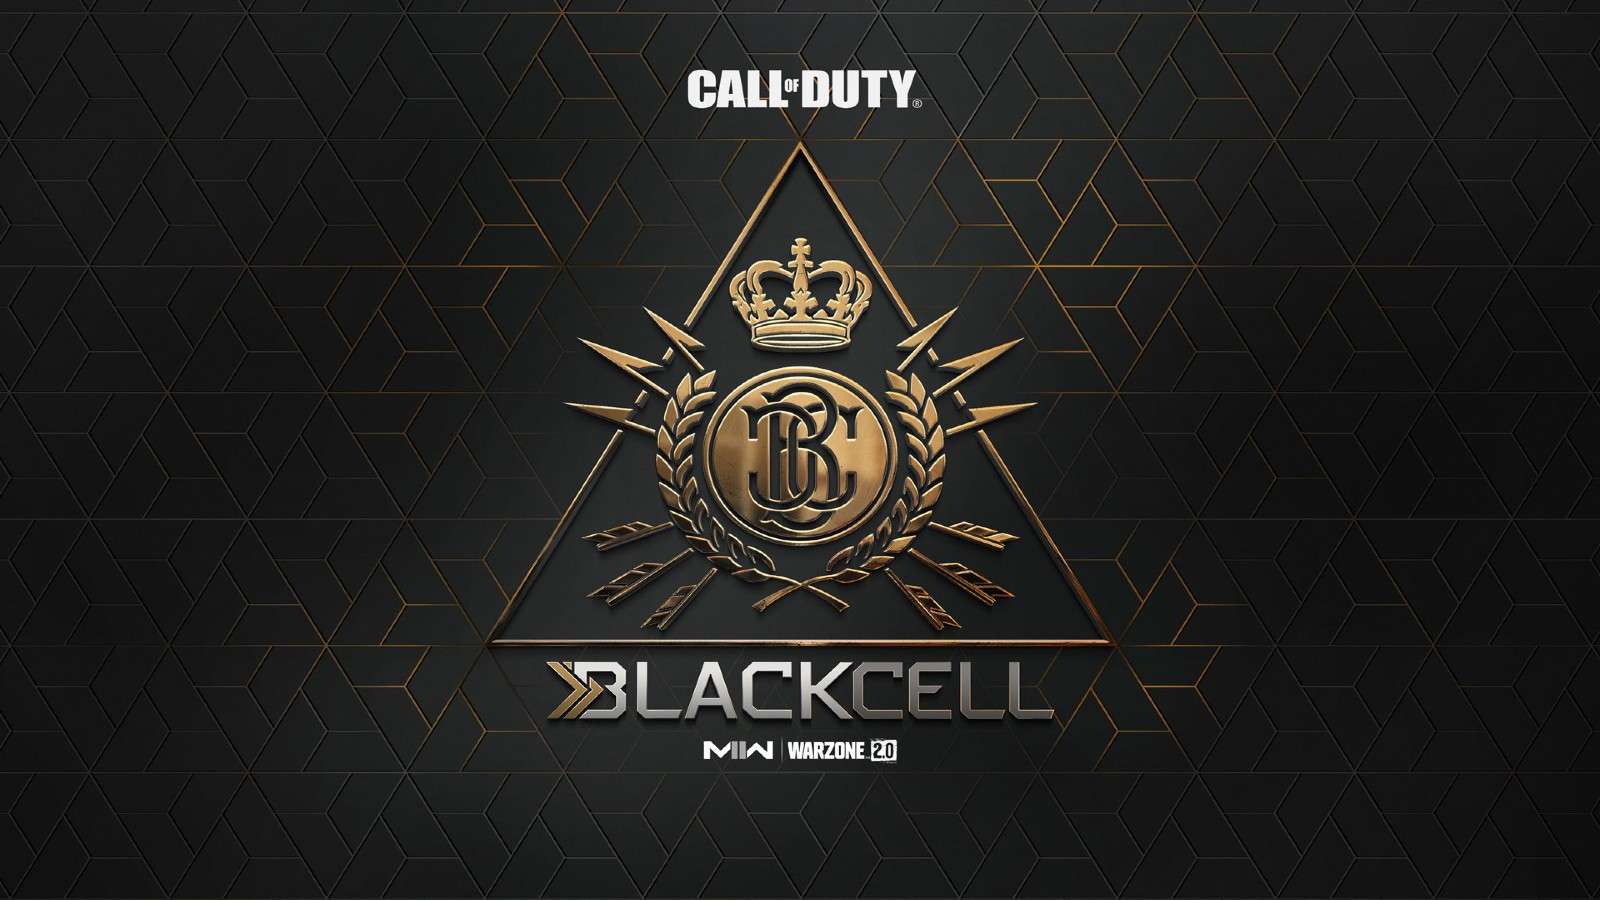 The BlackCell BattlePass in MW2